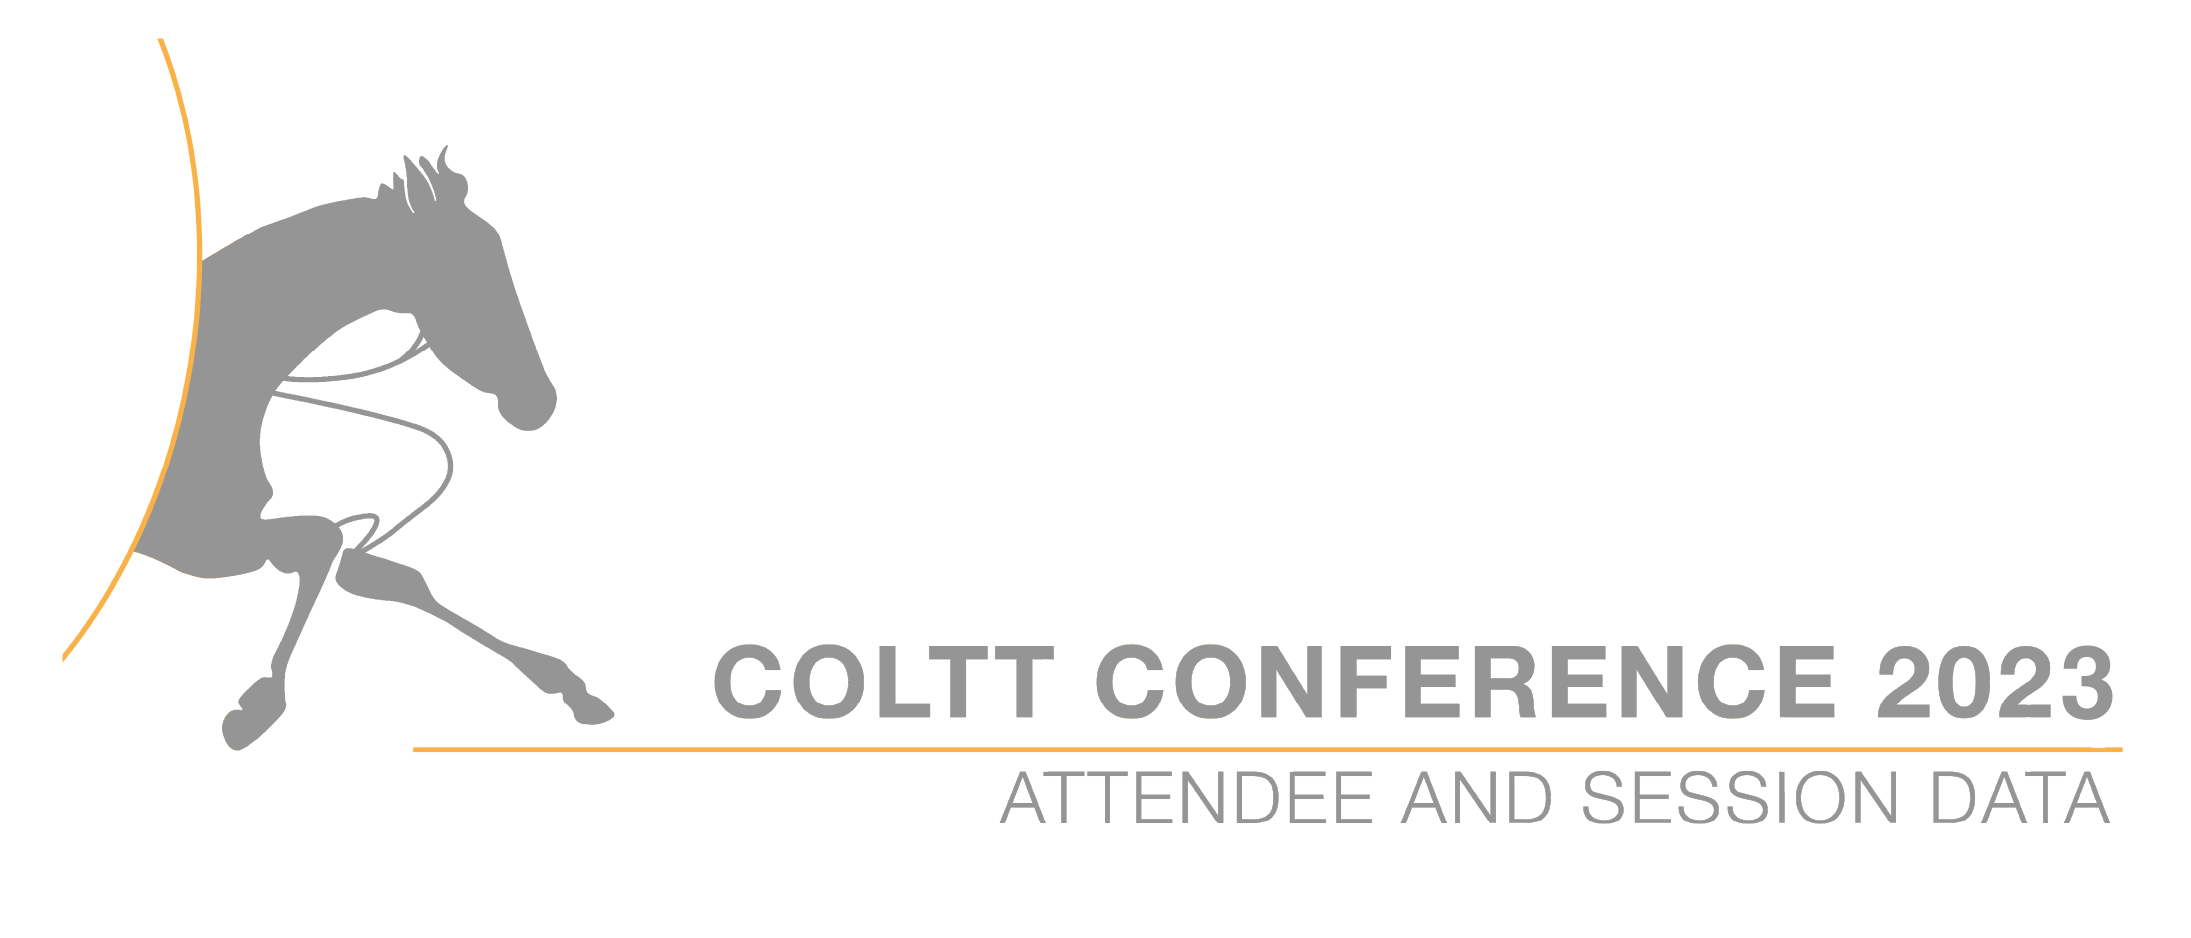 COLTT Conference 2023 Attendee Session Data horse banner